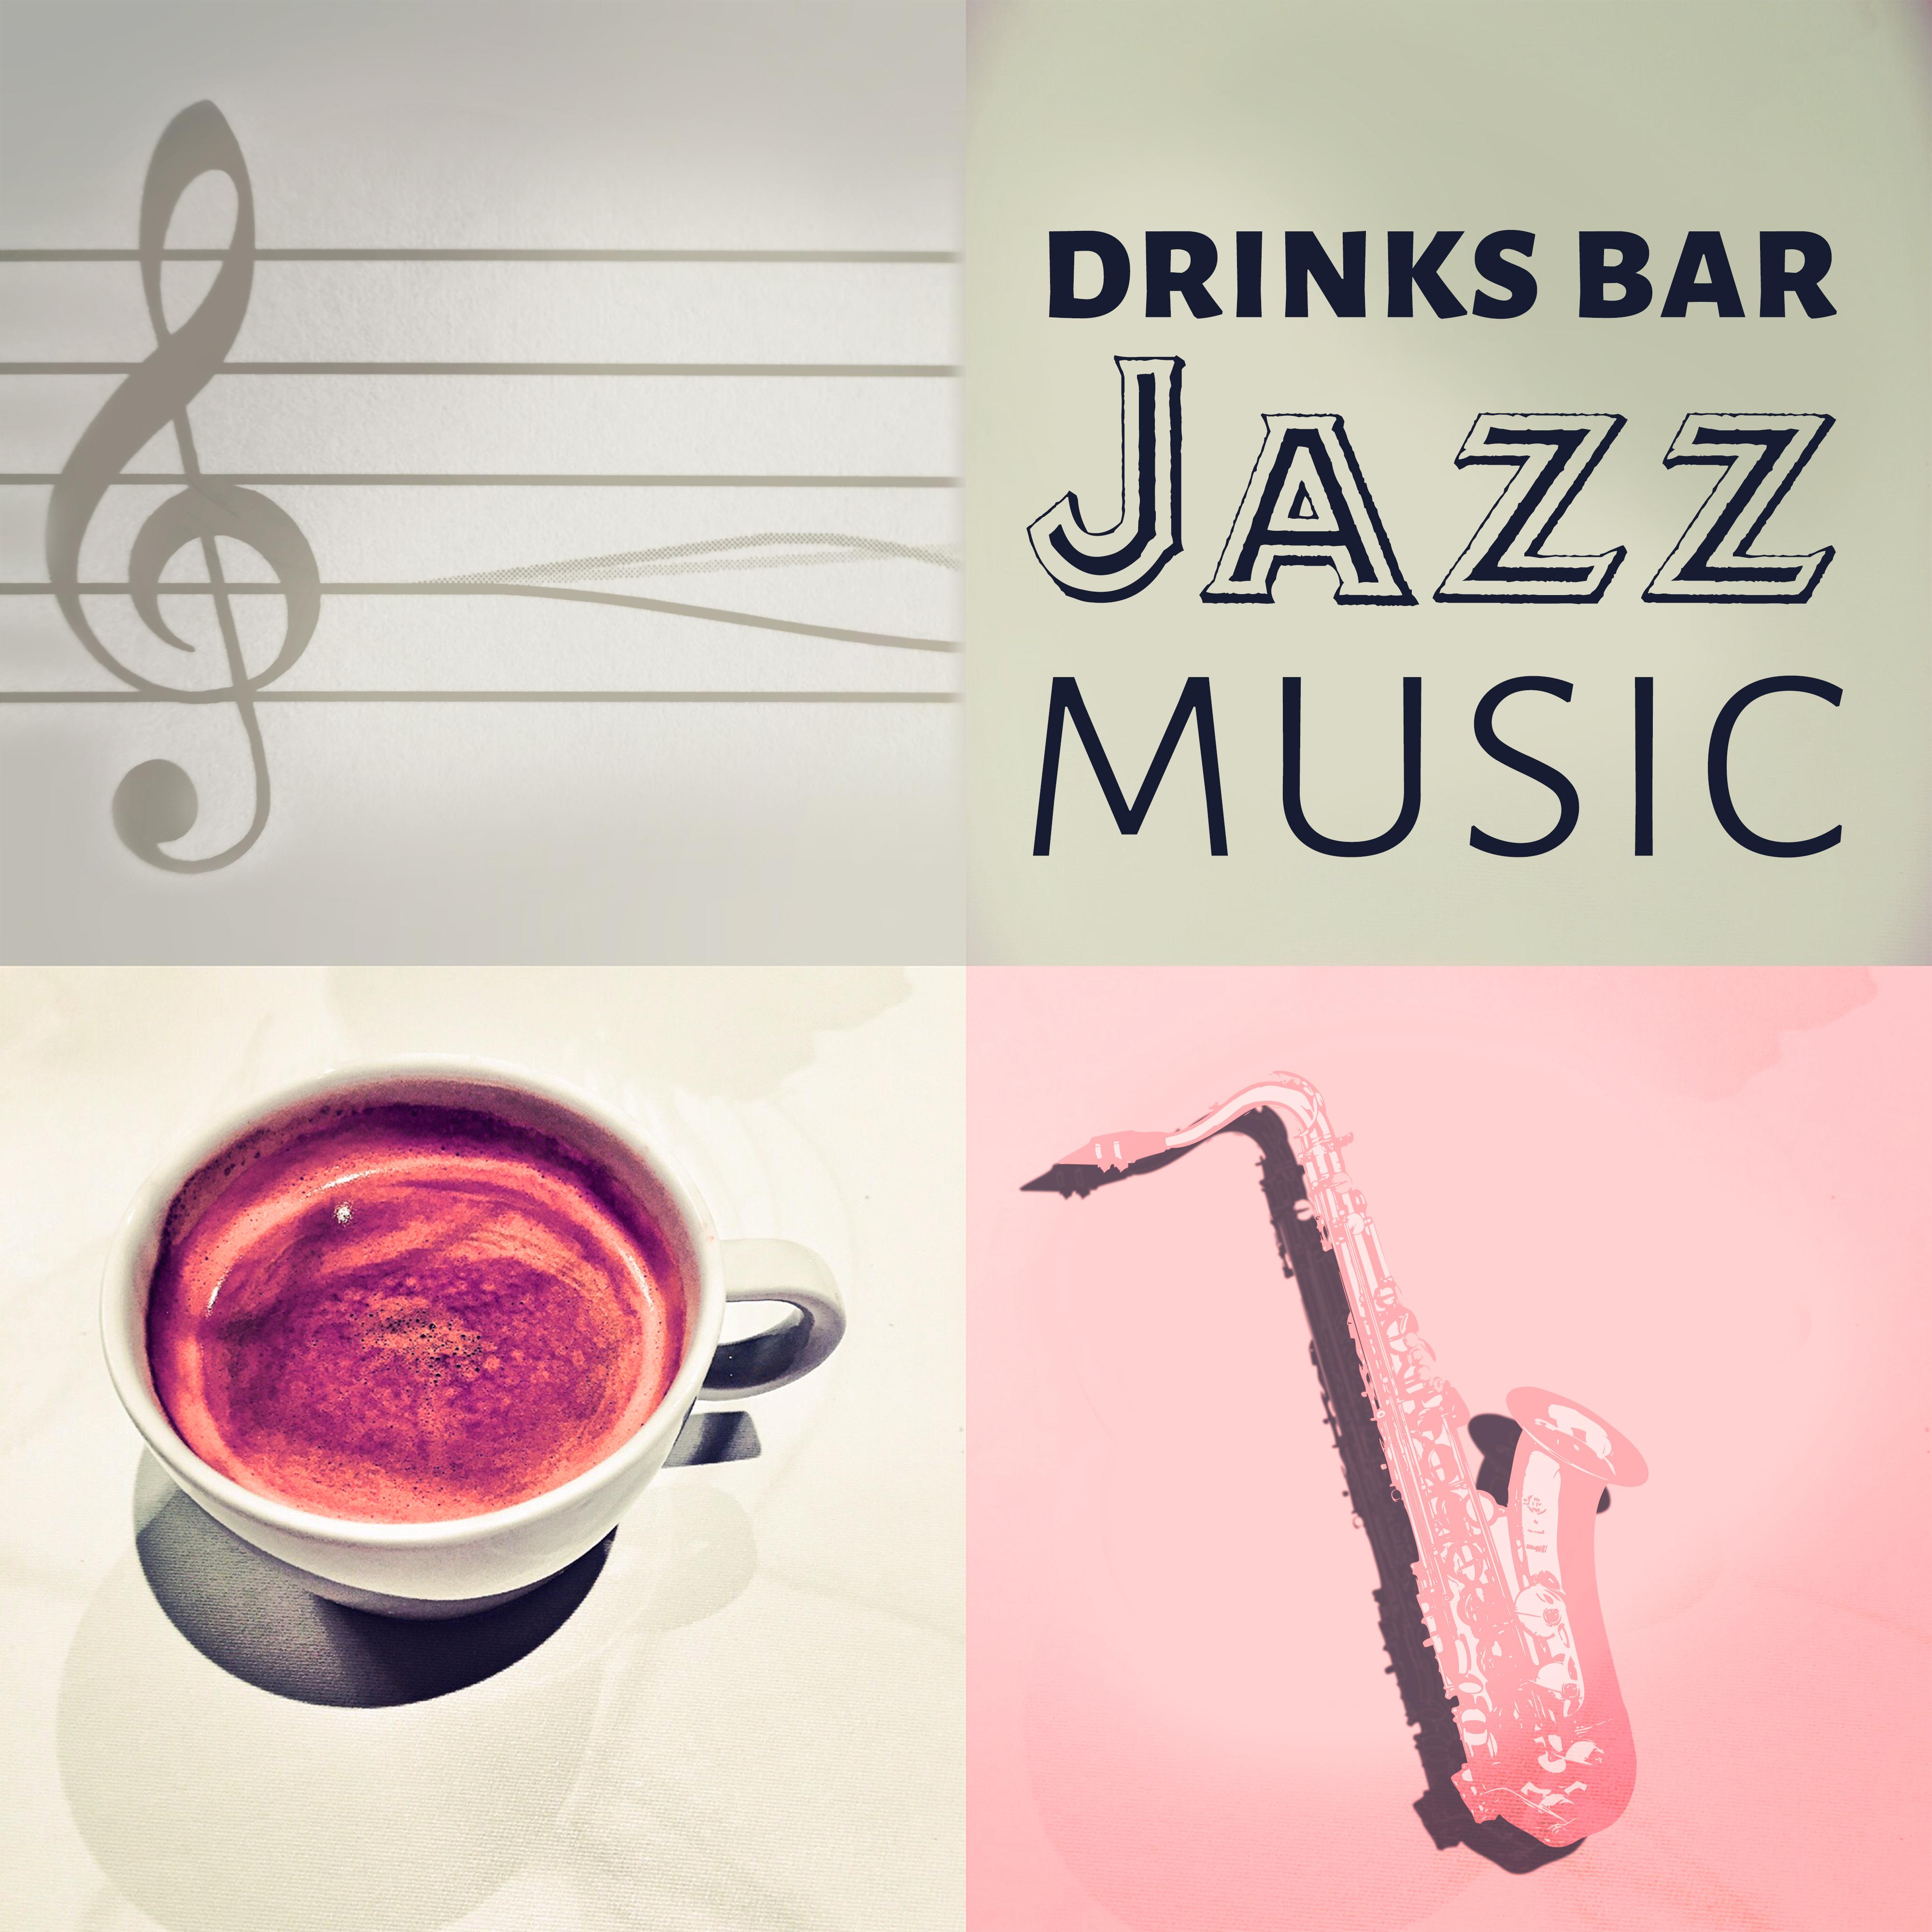 Drinks Bar Jazz Music - Gentle Piano Music for Family Time, Piano Bar, Coffee Break, Luxury Lounge, Time for Tea, Home Sweet Home